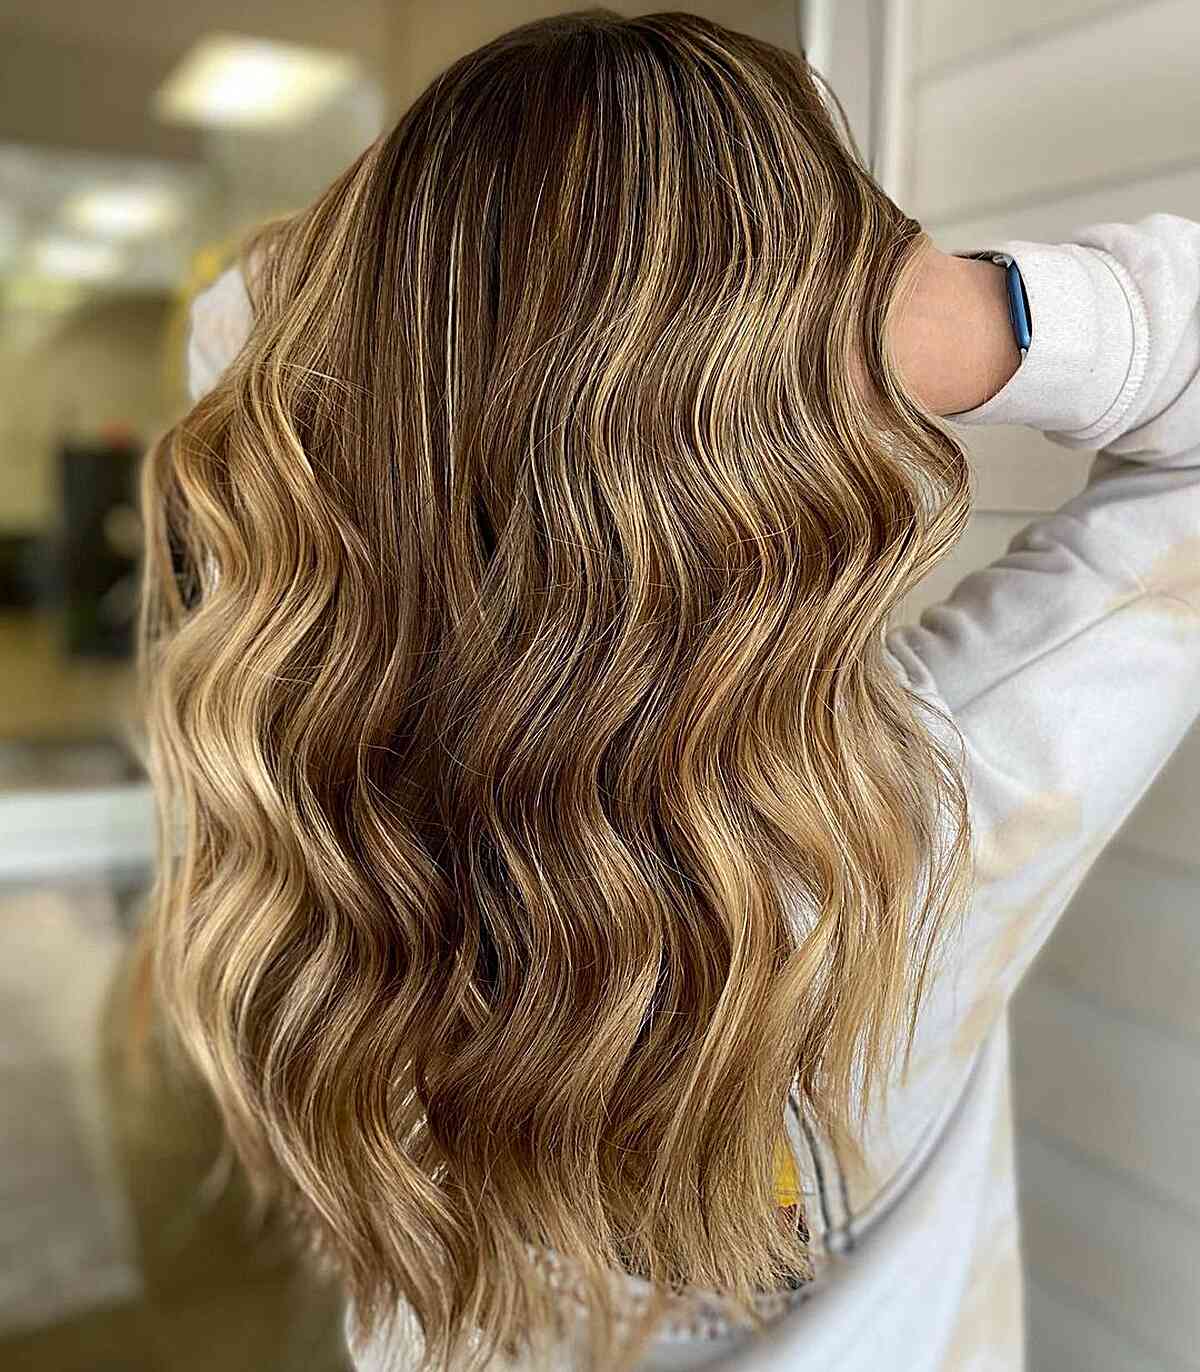 Golden Brown and Blonde Balayage Hair with Long Soft Waves